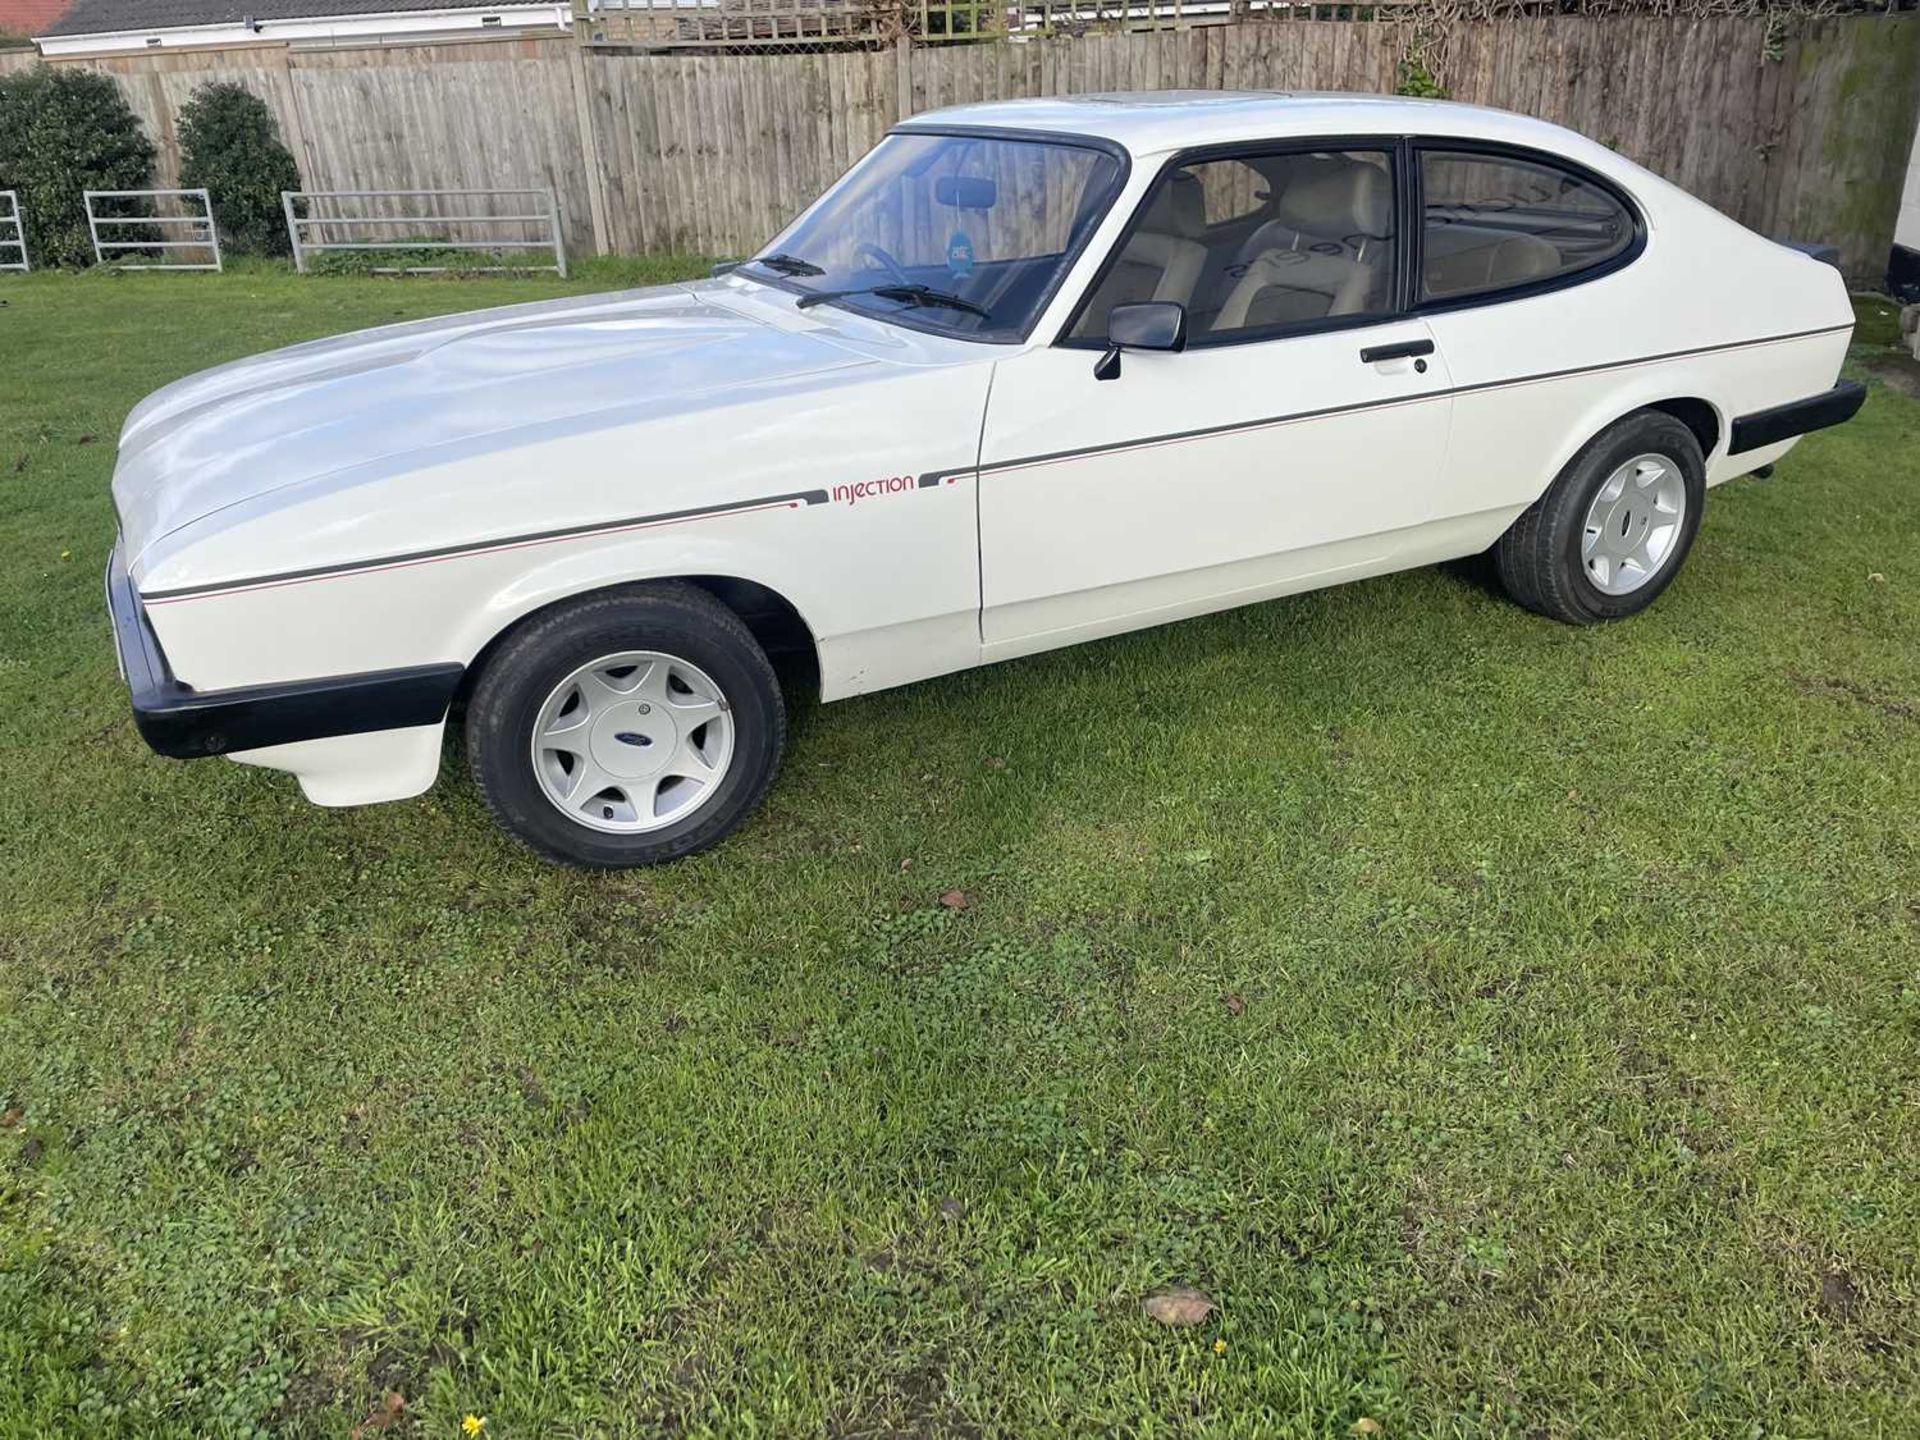 1984 Ford Capri 2.8 Injection - Image 5 of 6